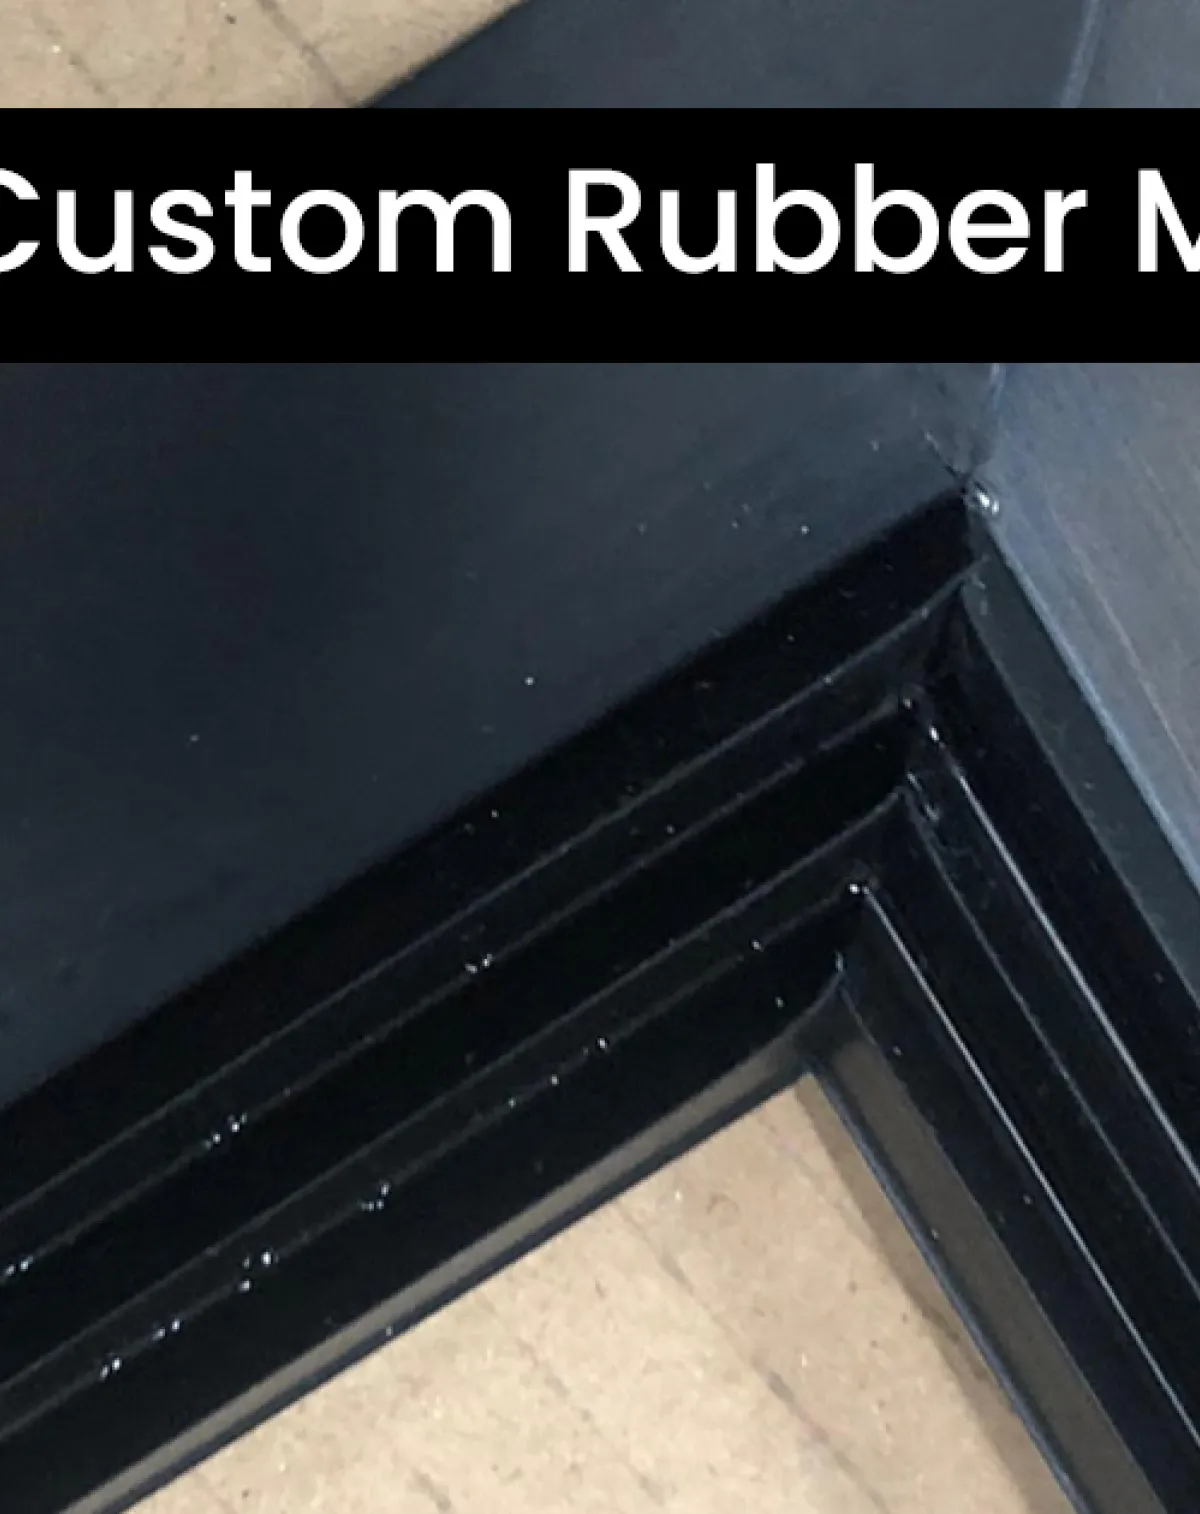 Custom Rubber Mouldings with Nufox Rubber UK